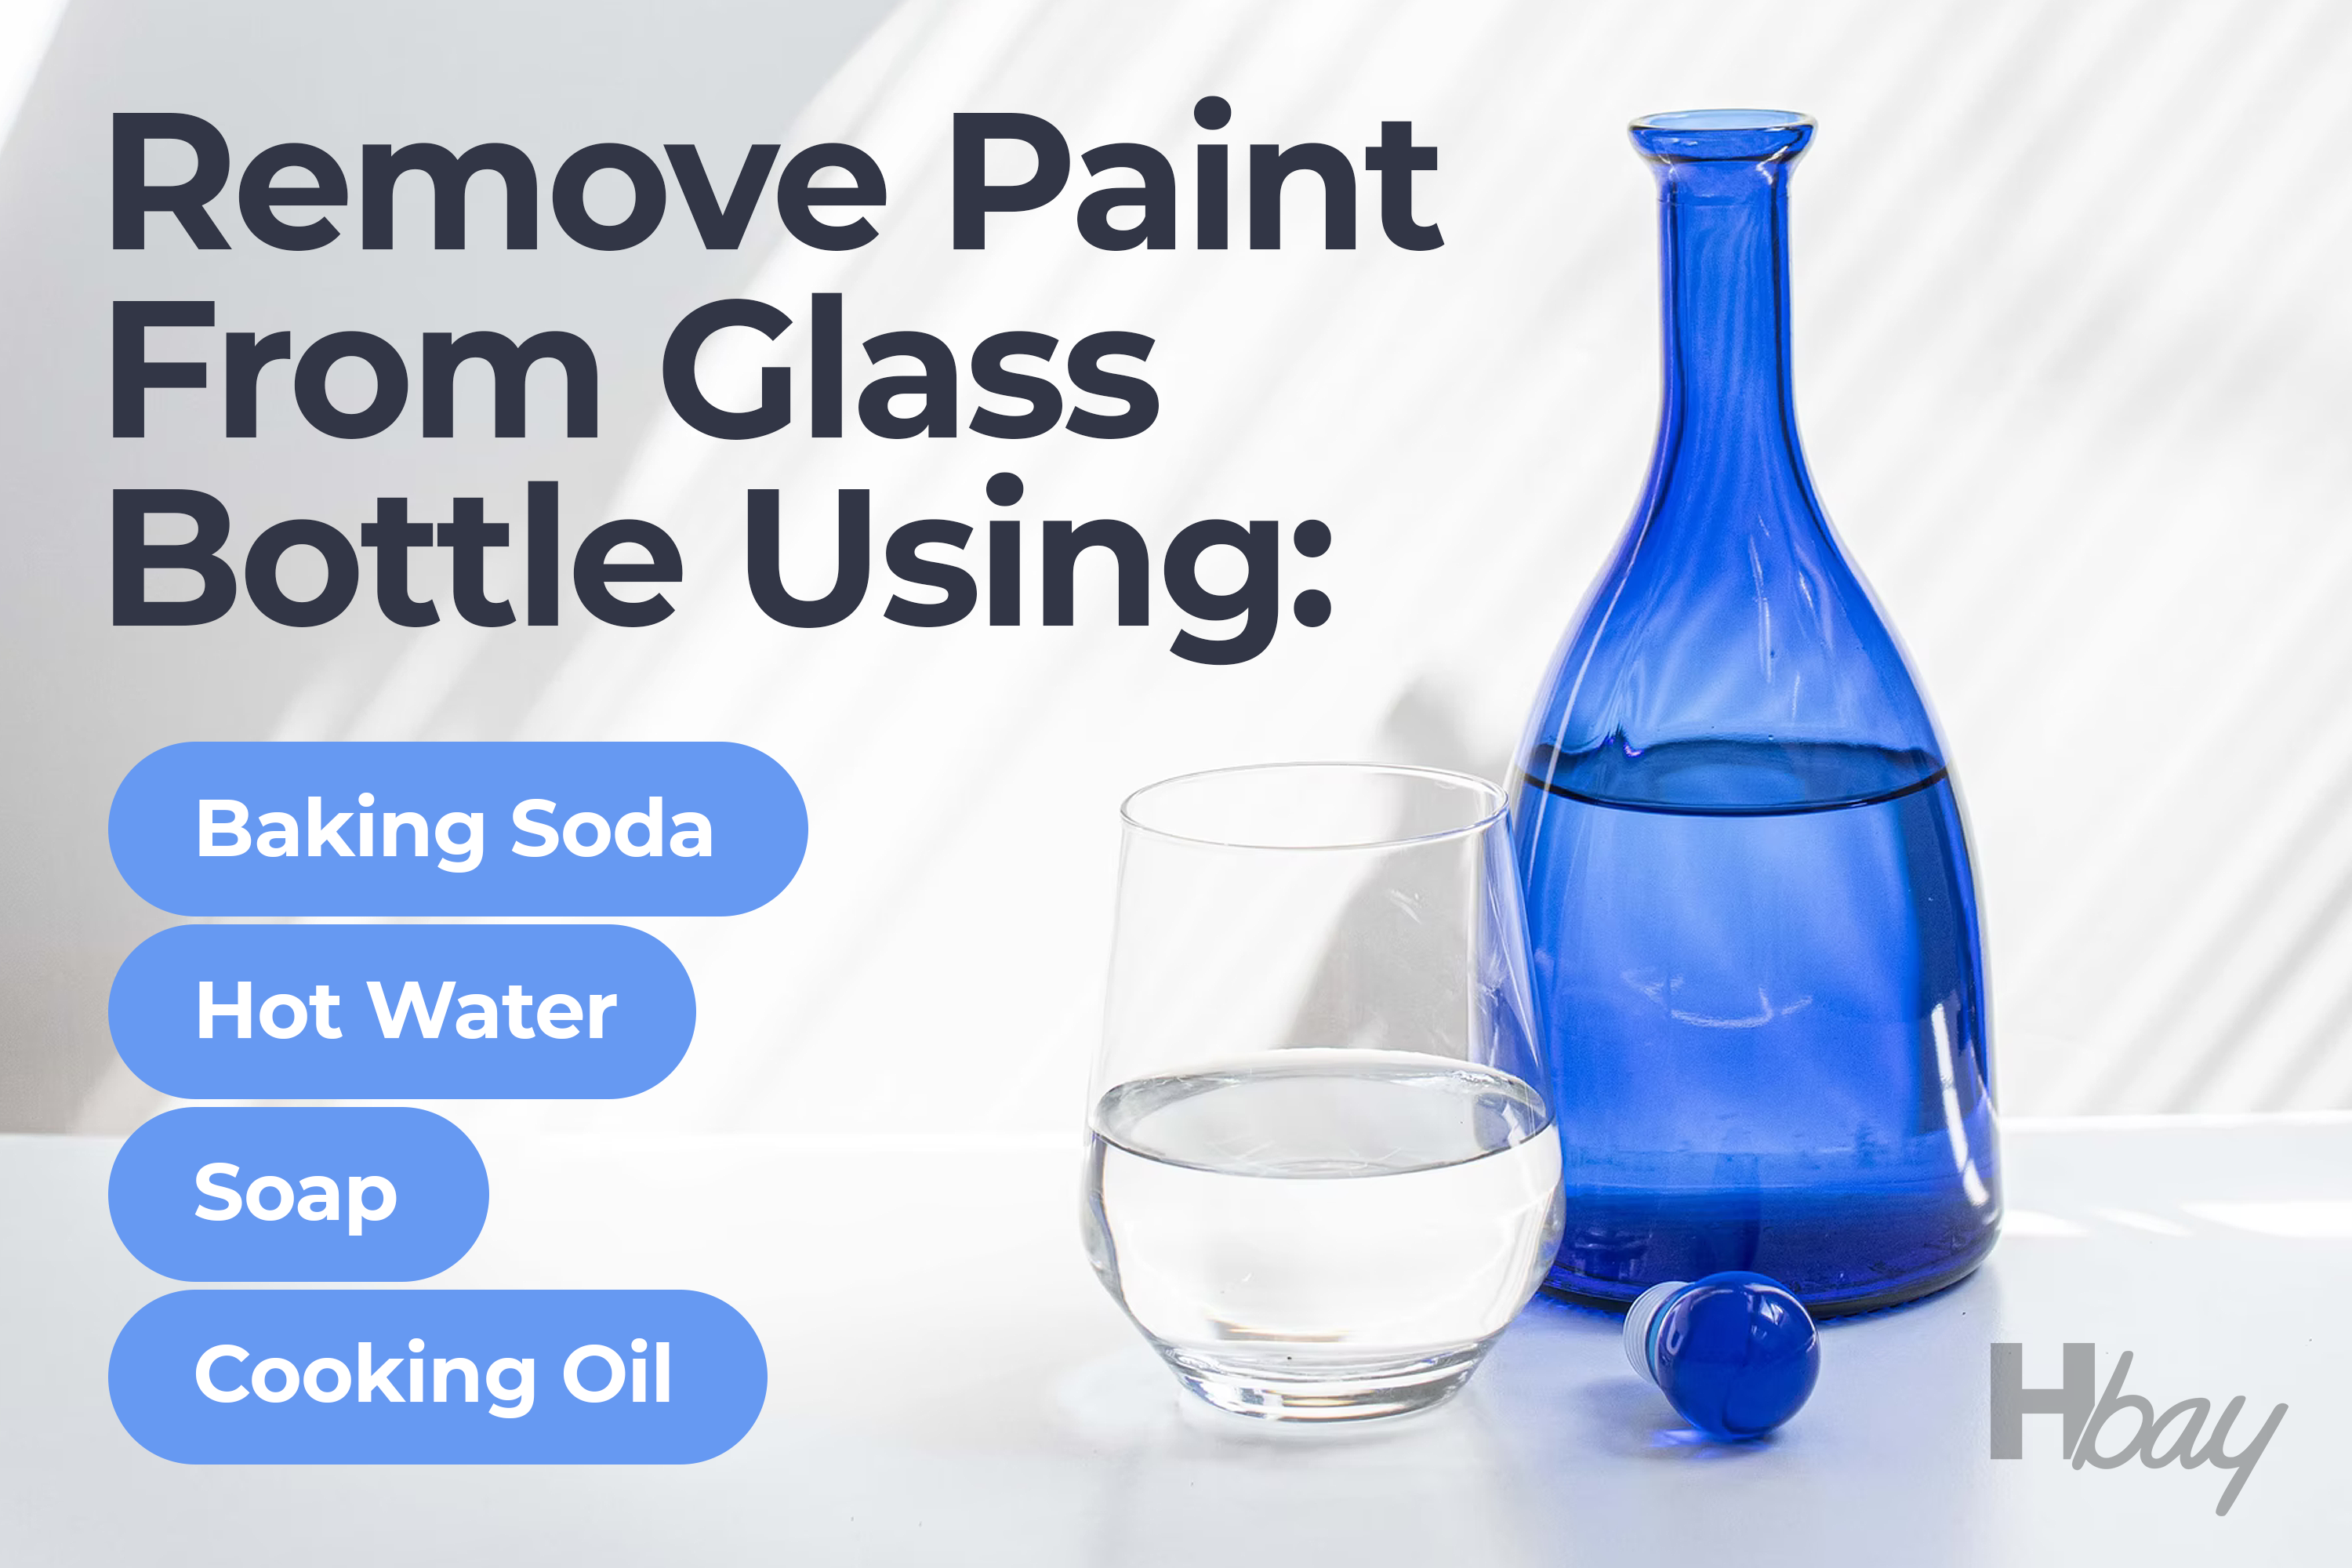 How to Remove Paint From Glass Bottles